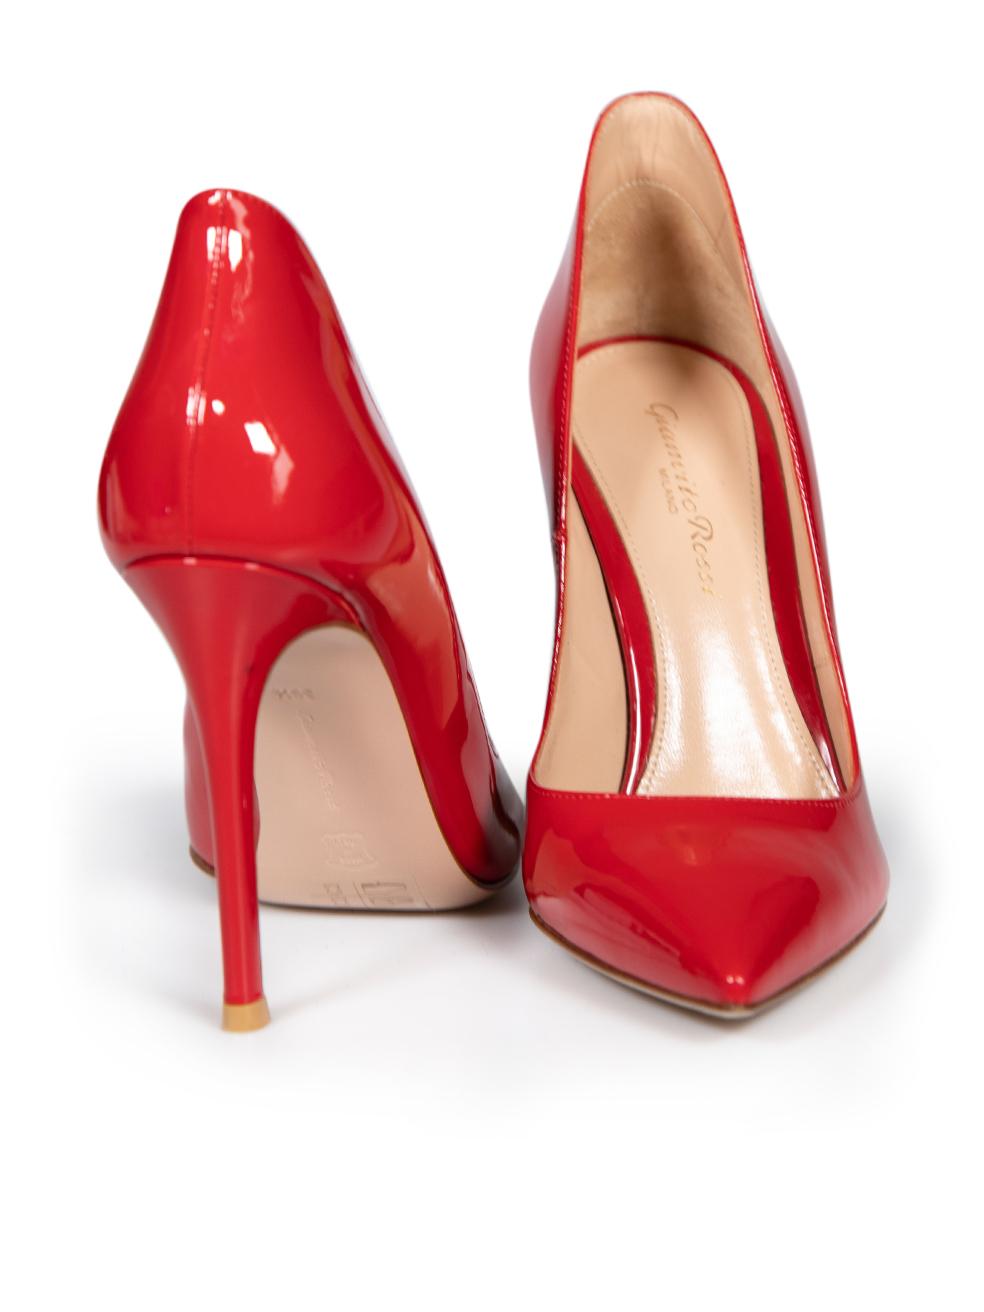 Gianvito Rossi Red Patent Leather Pointed Toe Heels Size IT 36.5 In Good Condition For Sale In London, GB